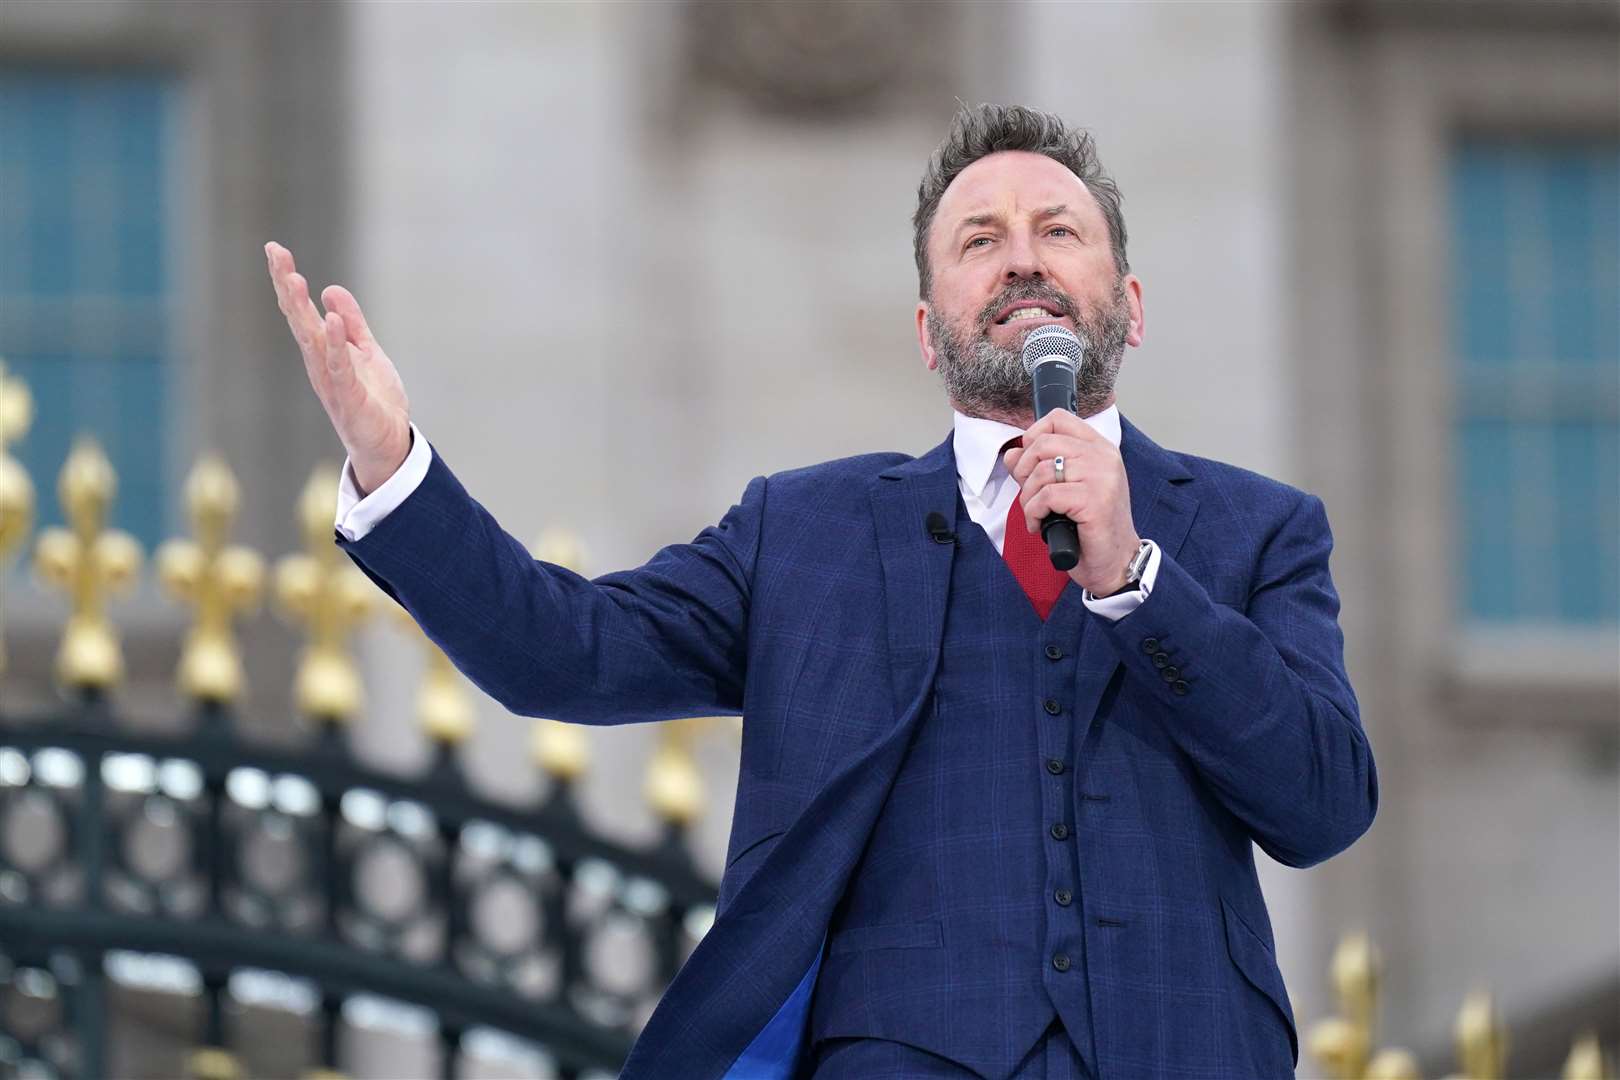 Comedian Lee Mack made a joke at Boris Johnson’s expense during a Saturday evening concert outside Buckingham Palace to mark the Queen’s Platinum Jubilee (Joe Giddens/PA)